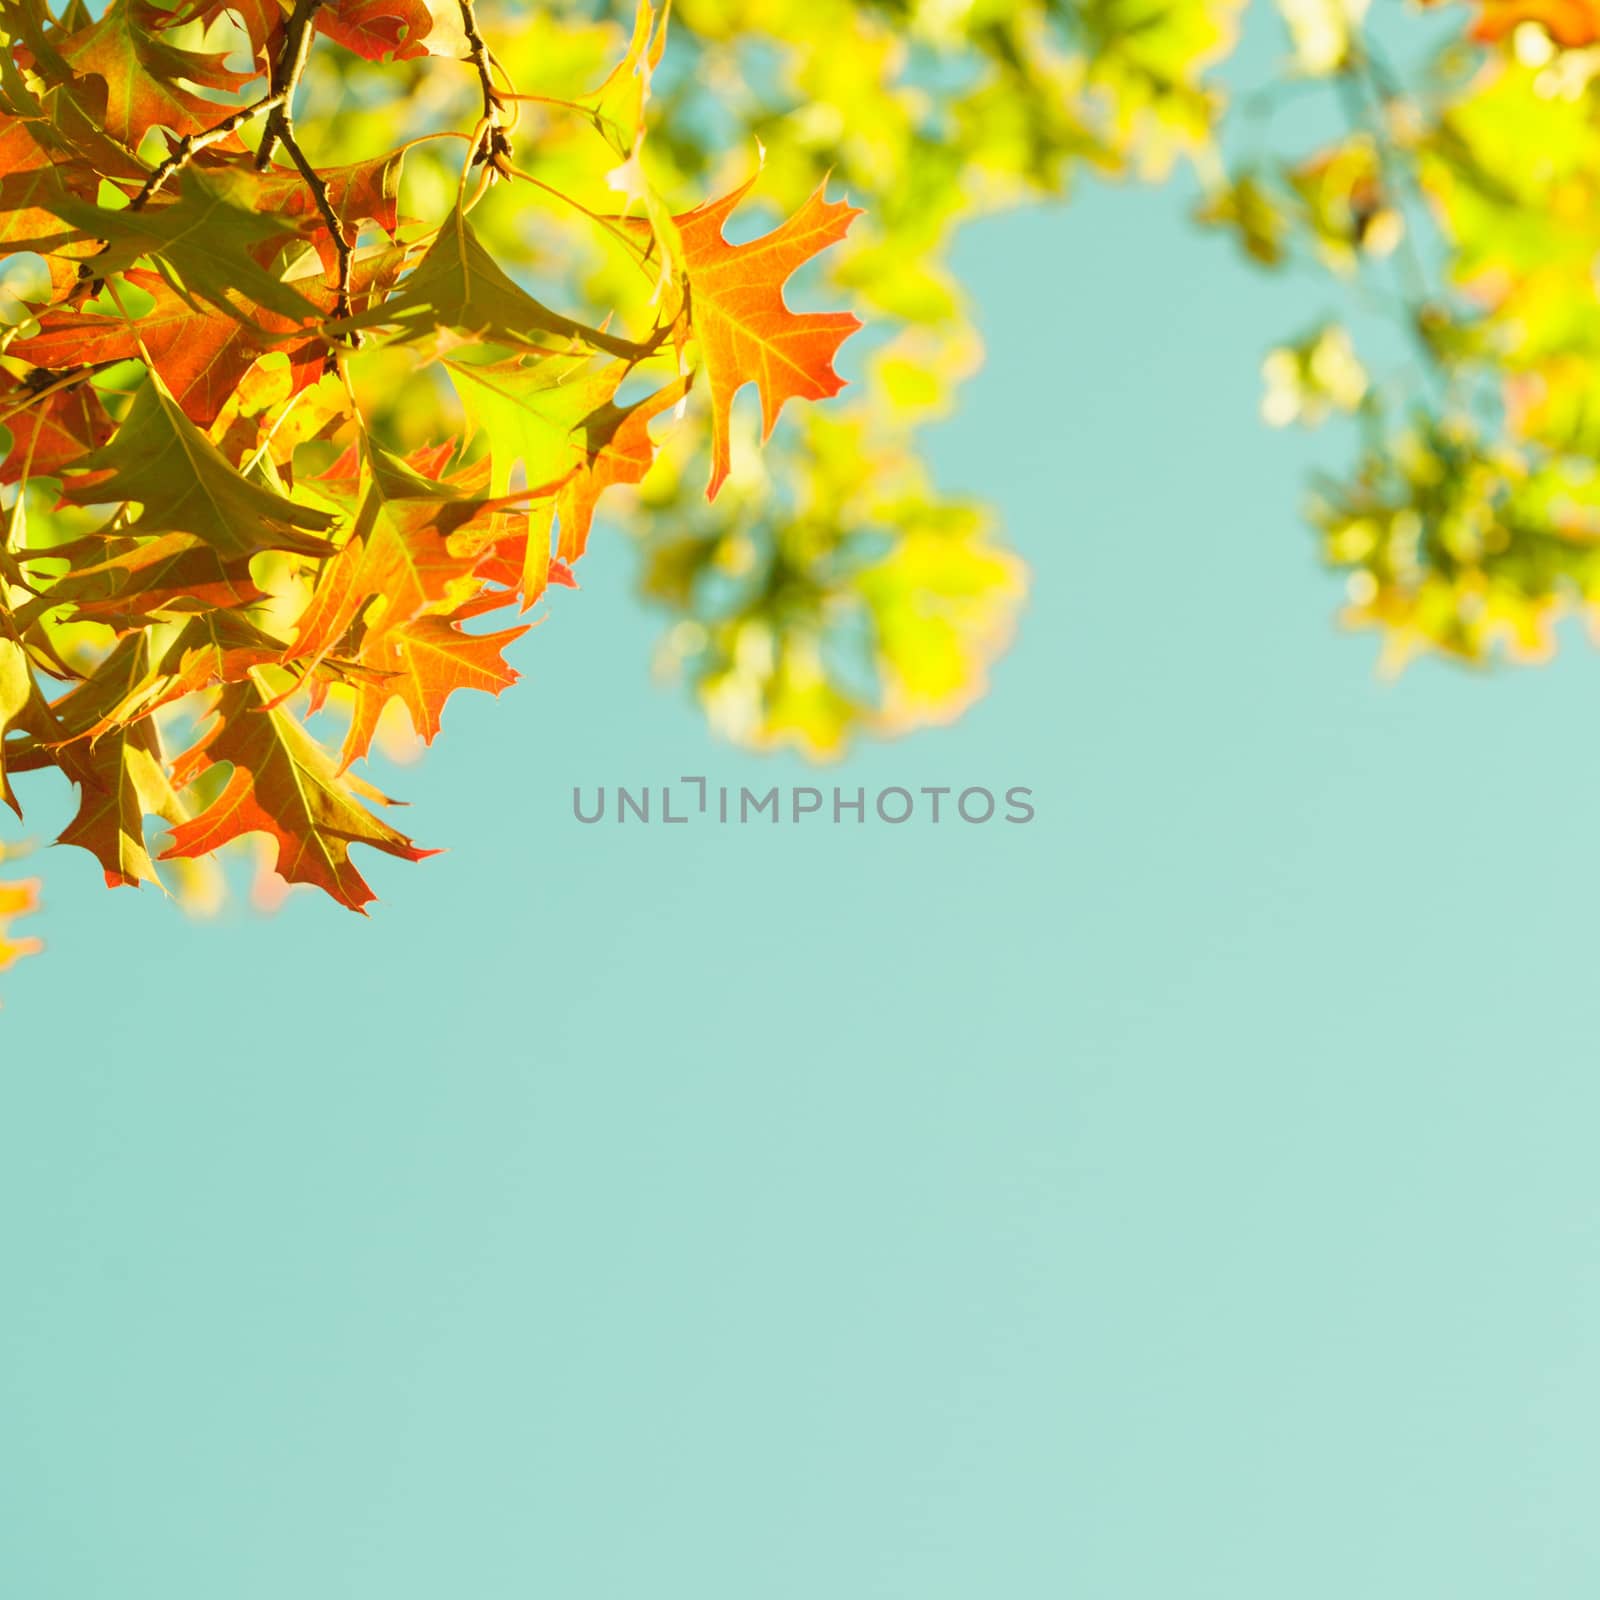 Maple leaves over green background